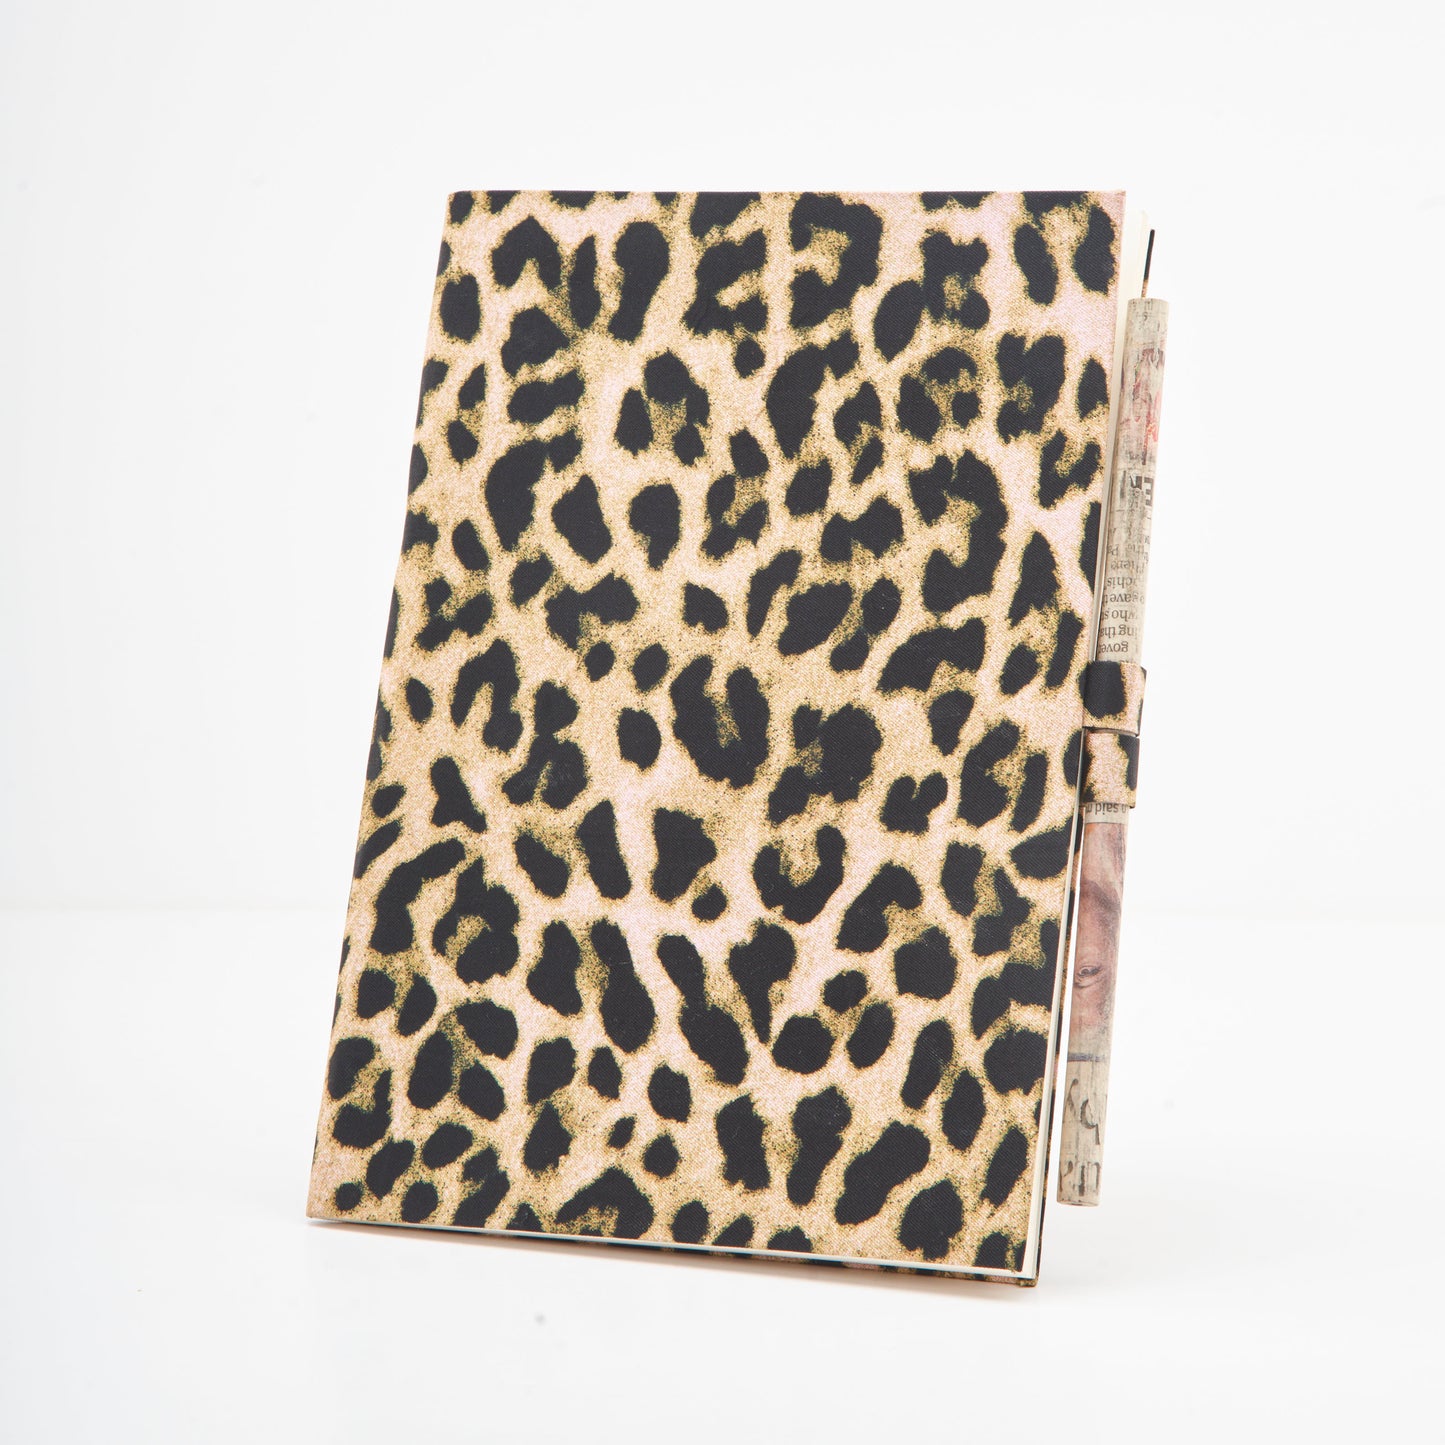 Leopard Print on Diary Cover with Newspaper Pencil